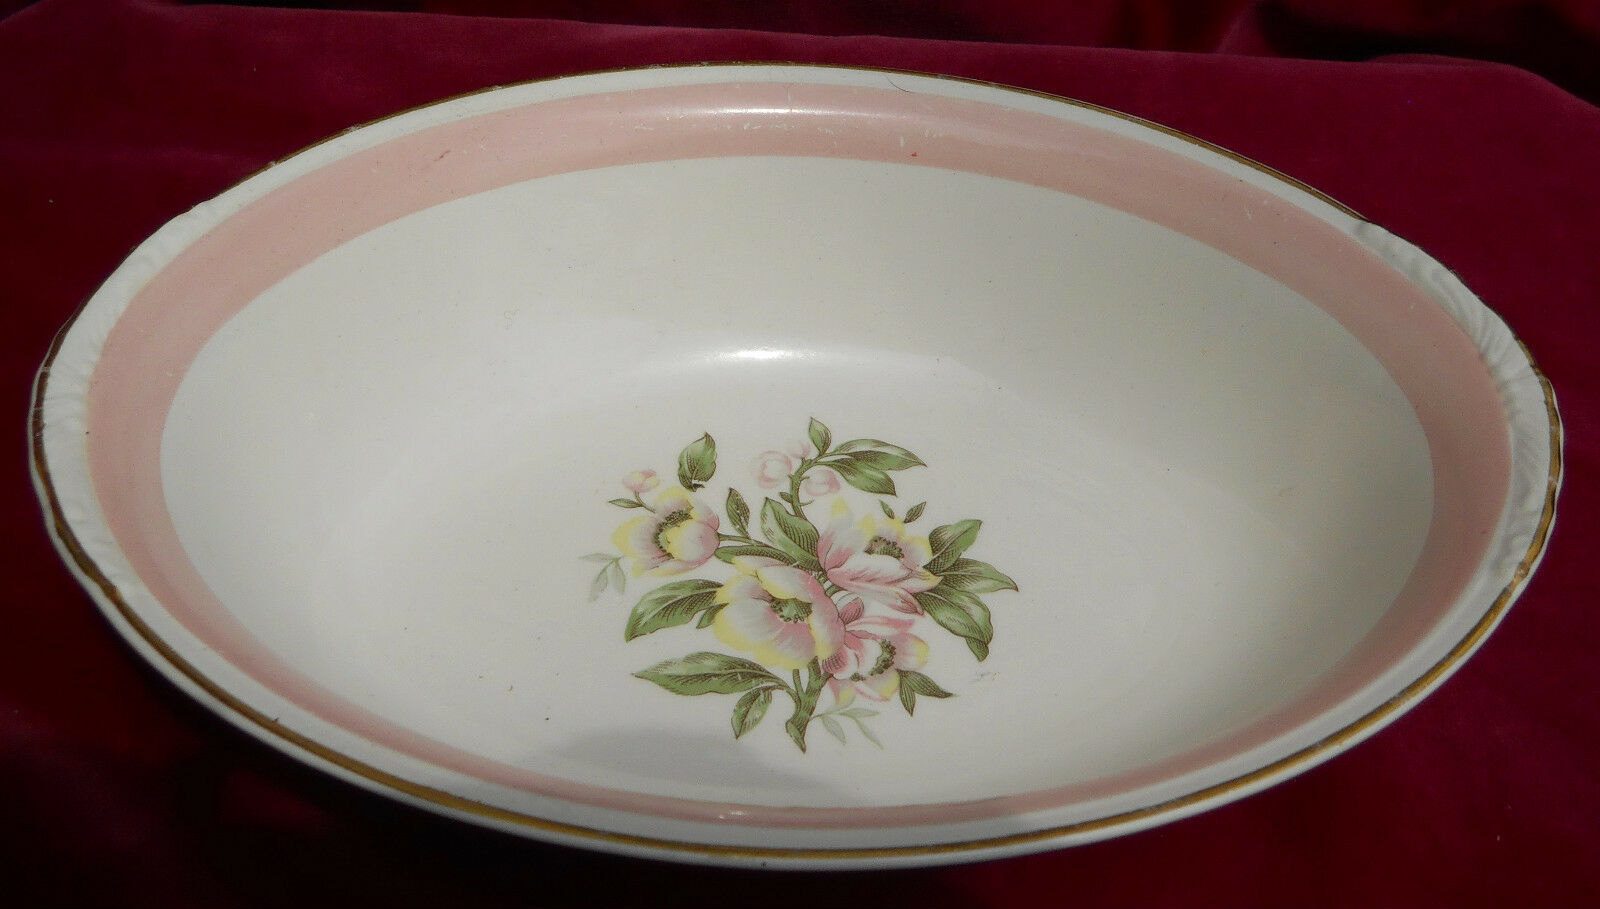 Primary image for HOMER LAUGHLIN NAUTILUS PINK BAND FLOWER N1769 BOWL S OVAL VEGETABLE SERVING